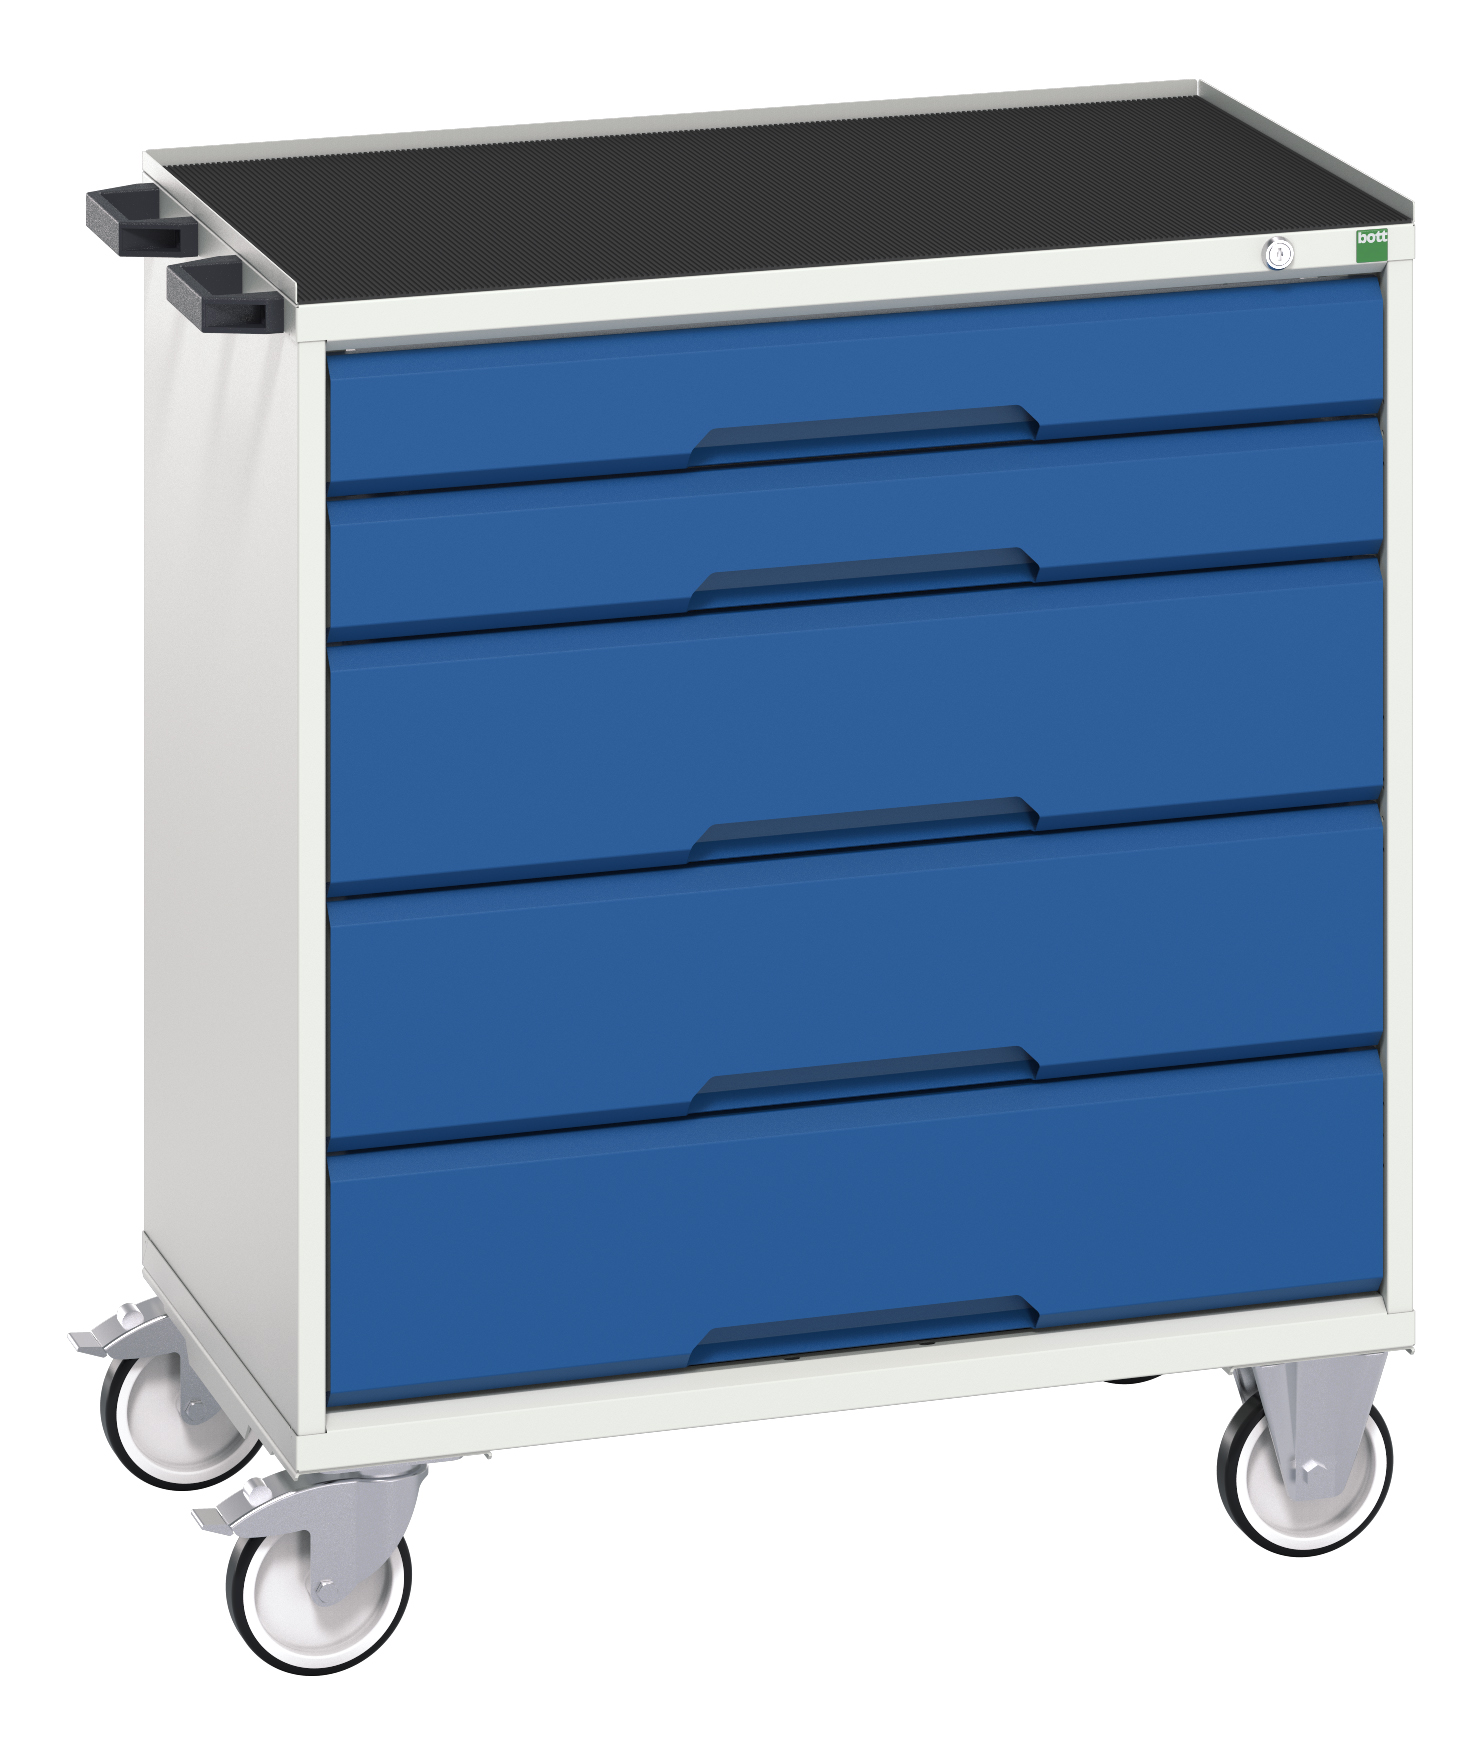 Bott Verso Mobile Drawer Cabinet With 5 Drawers & Top Tray With Mat - 16927002.11